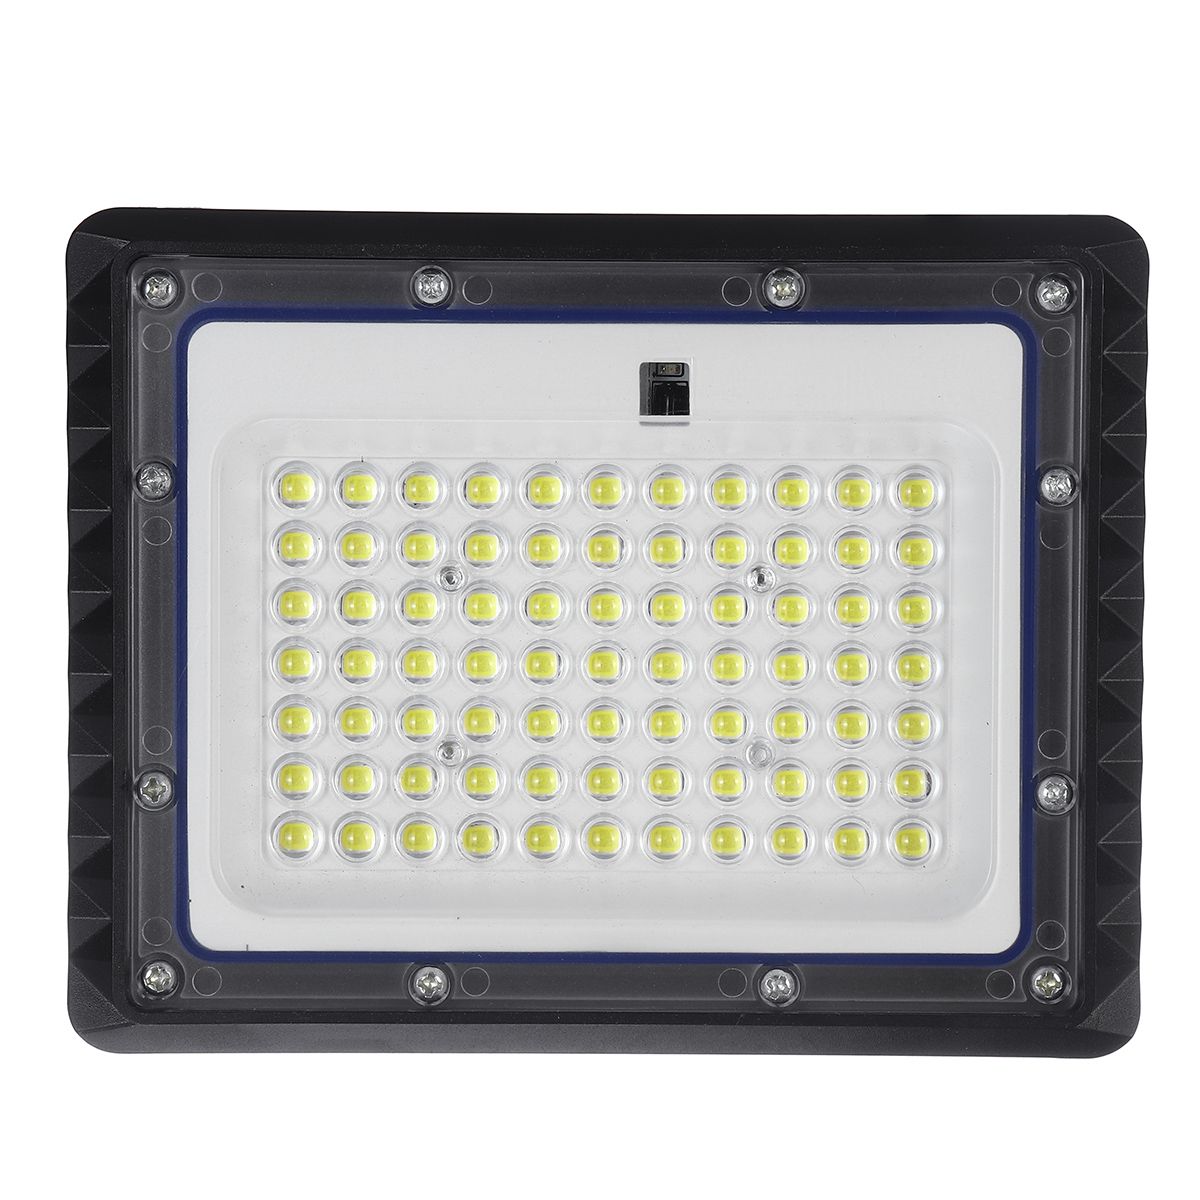 77128247368LED-Solar-Flood-Light-SMD2835-Outdoor-Garden-Street-Wall-Lamp--Remote-Control-1754920